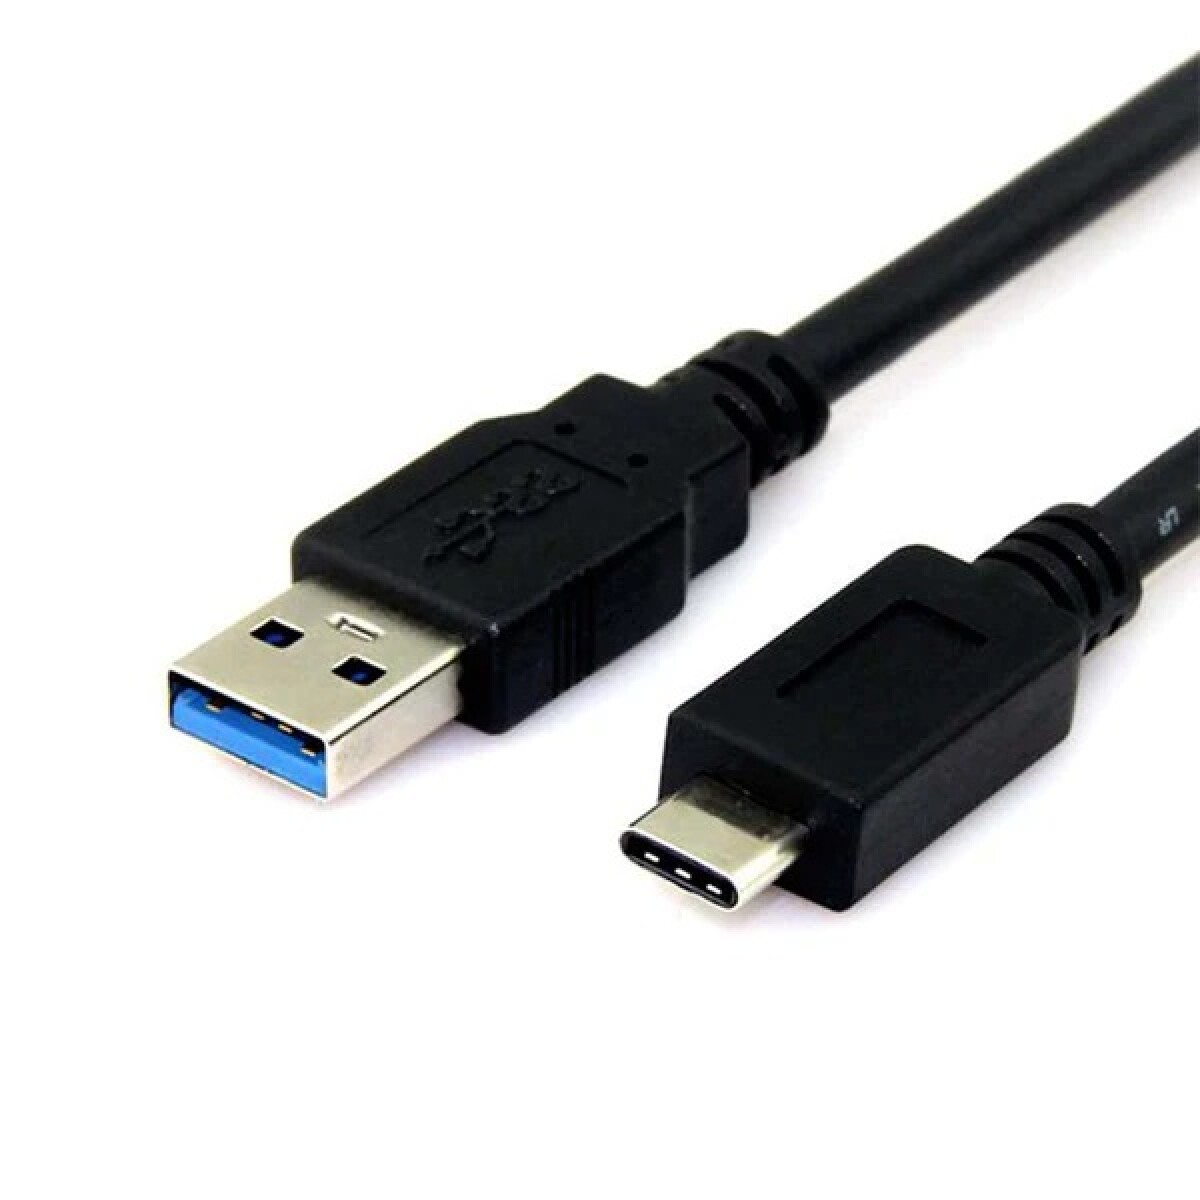 CABLE USB 3.0 TYPE-C A TIPO-A (USB/MICRO) - 5FT - 001 